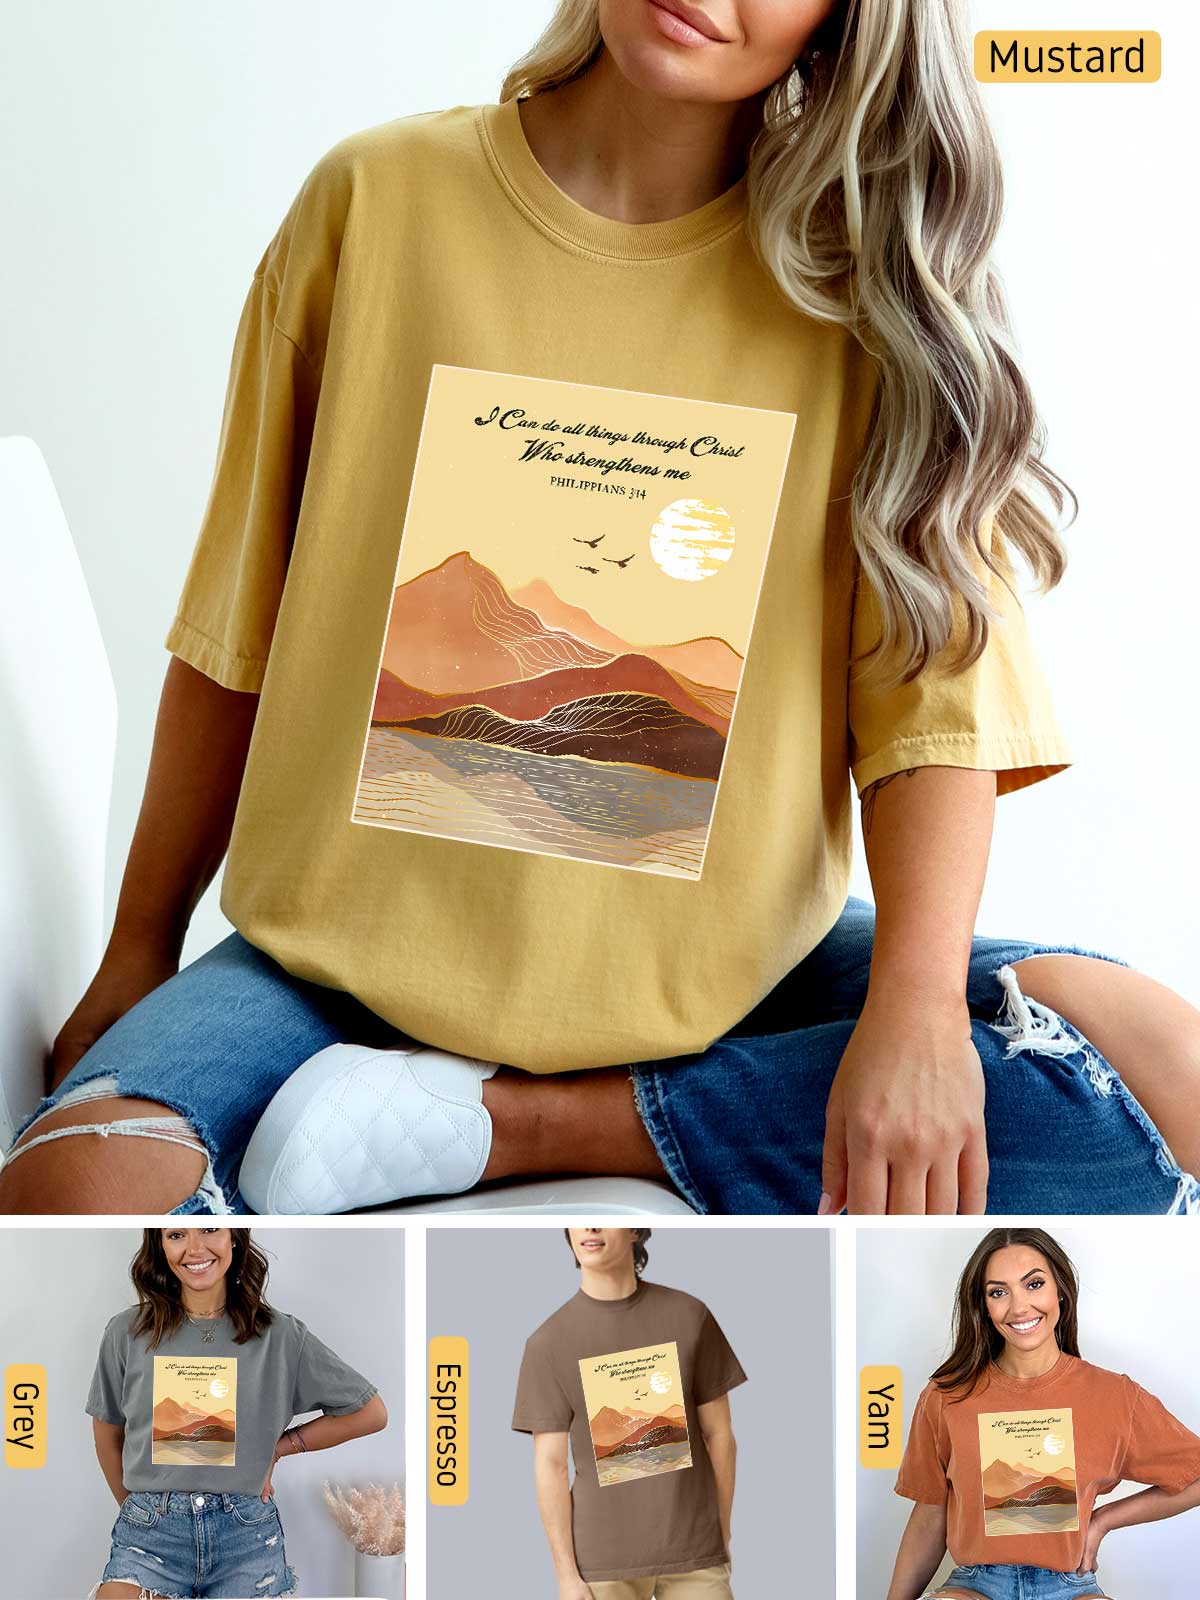 a woman wearing a mustard colored t - shirt with a mountain scene on it